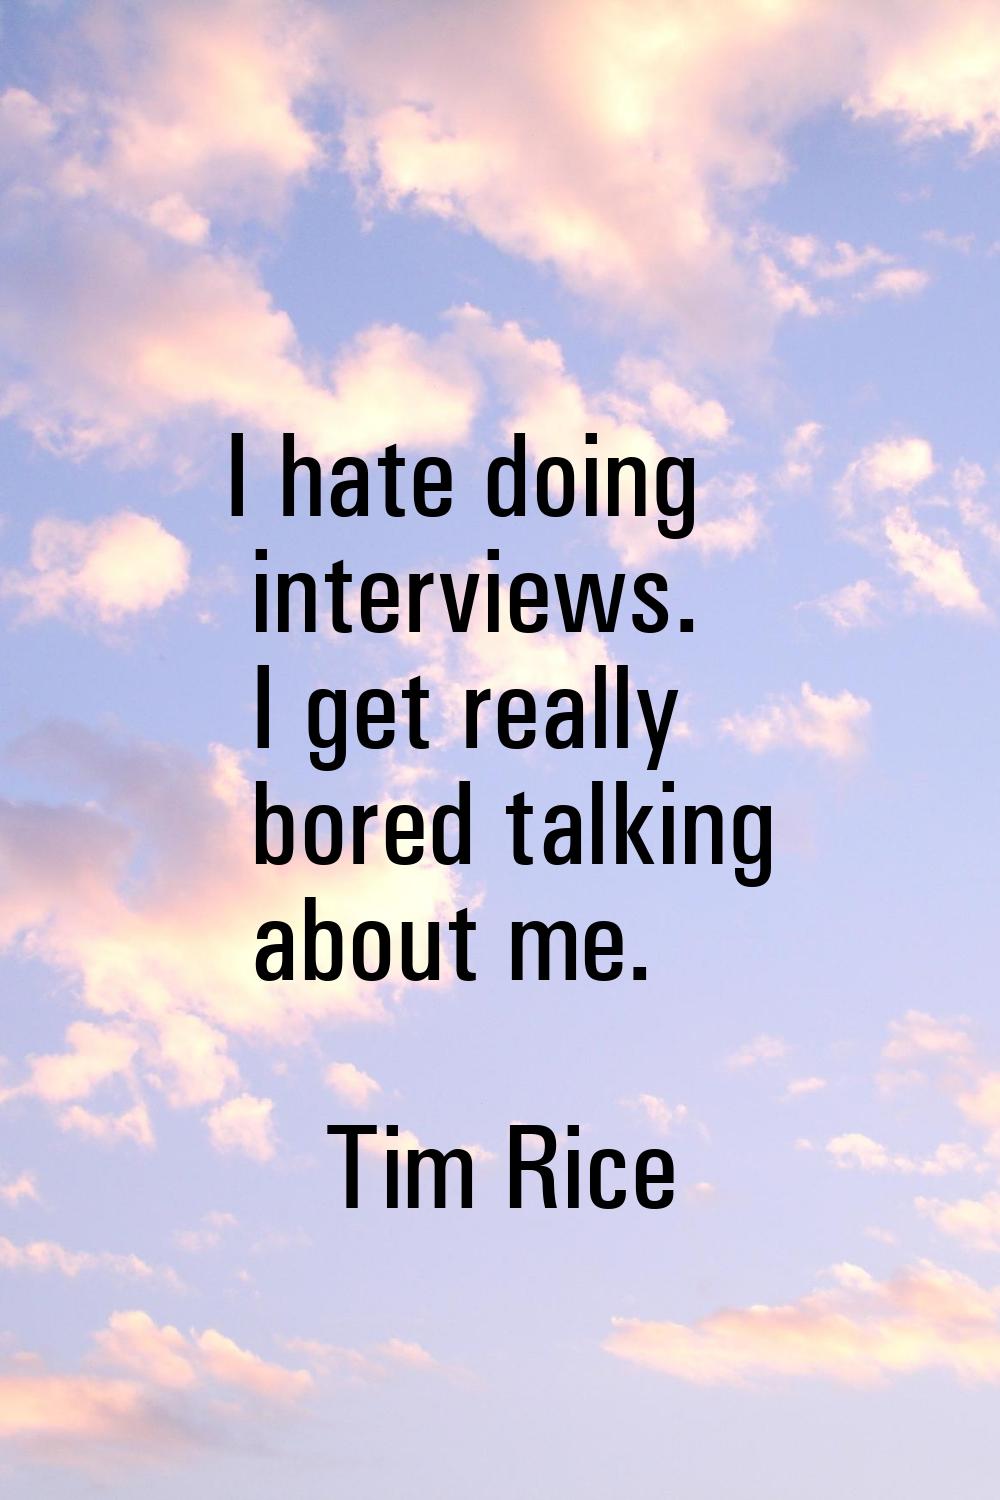 I hate doing interviews. I get really bored talking about me.